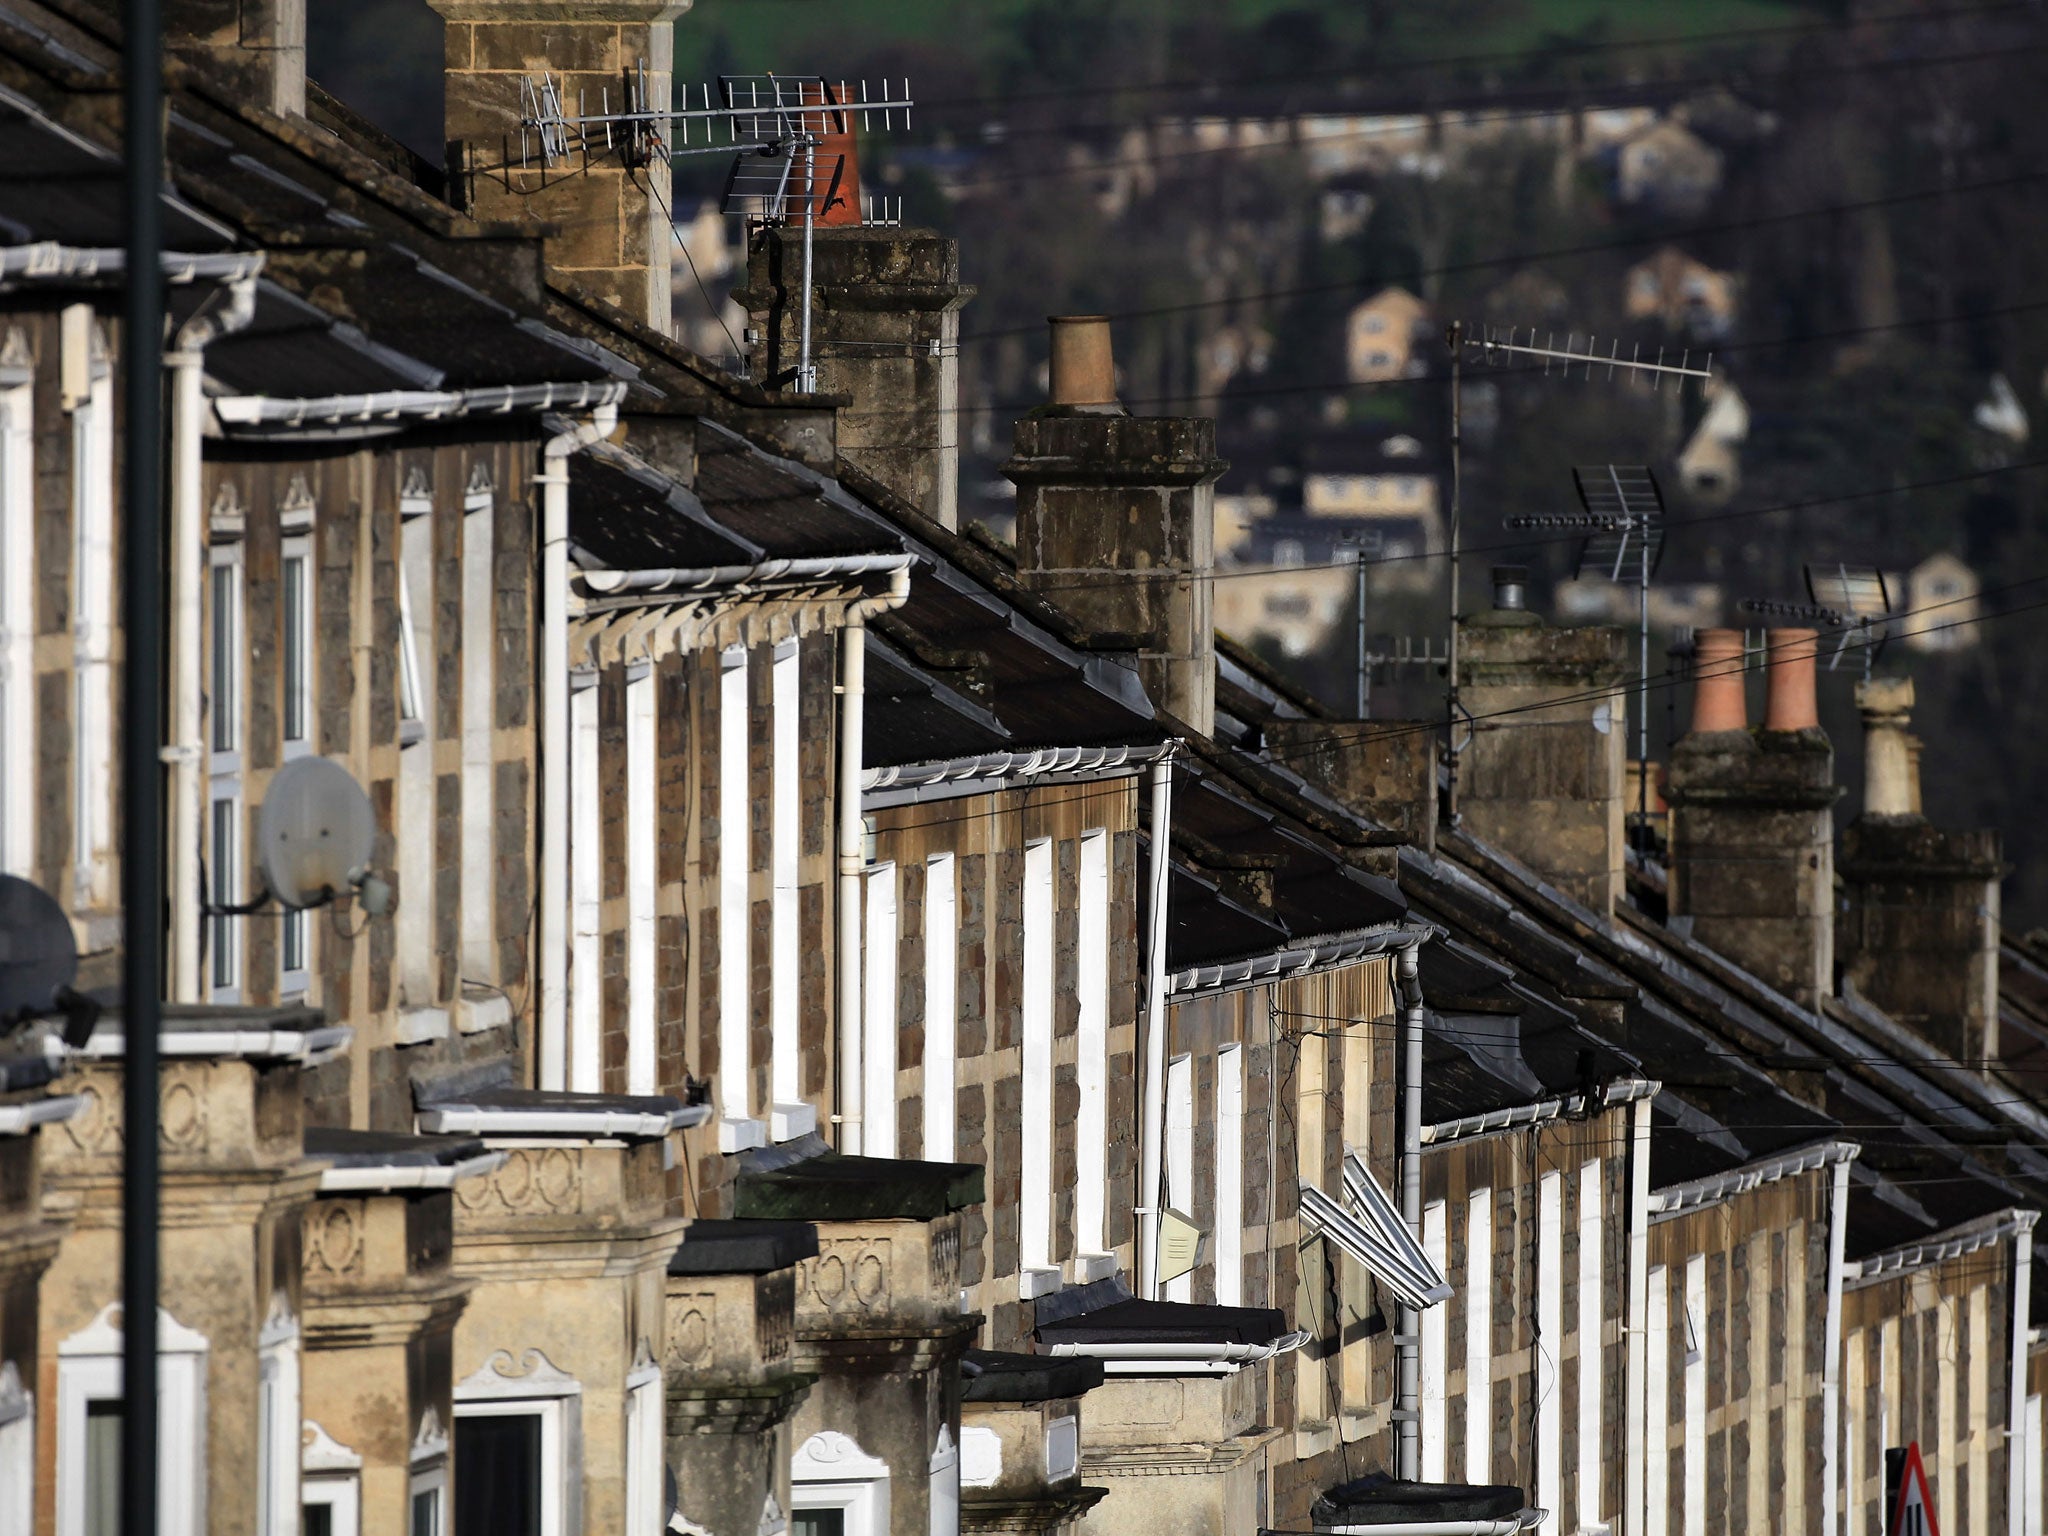 The winter sun illuminates houses in a residential street on January 2, 2012 in Bath, England.